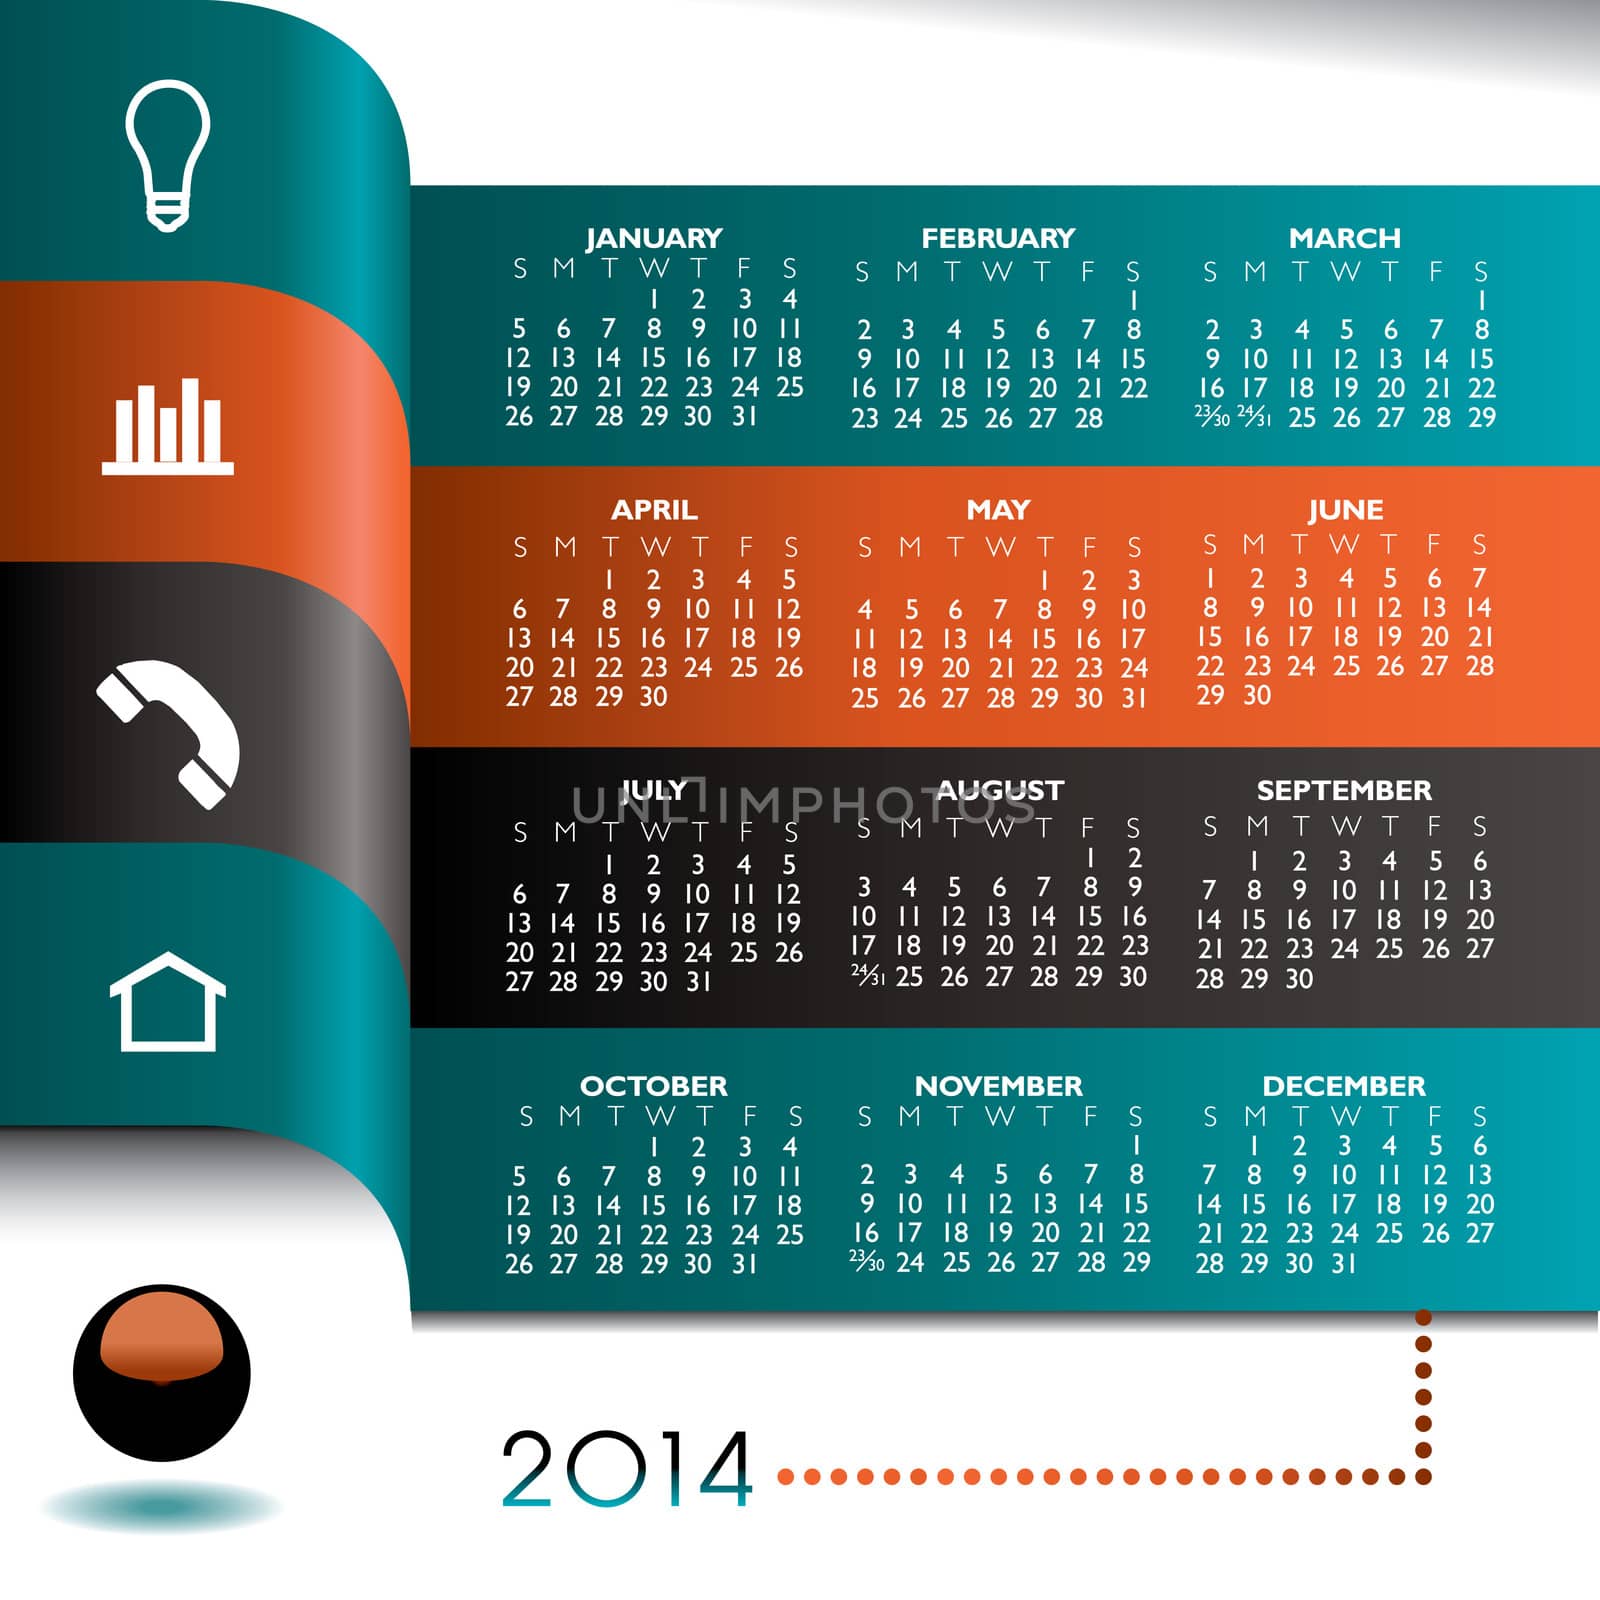 2014 Creative Infographic Calendar for Print or Web